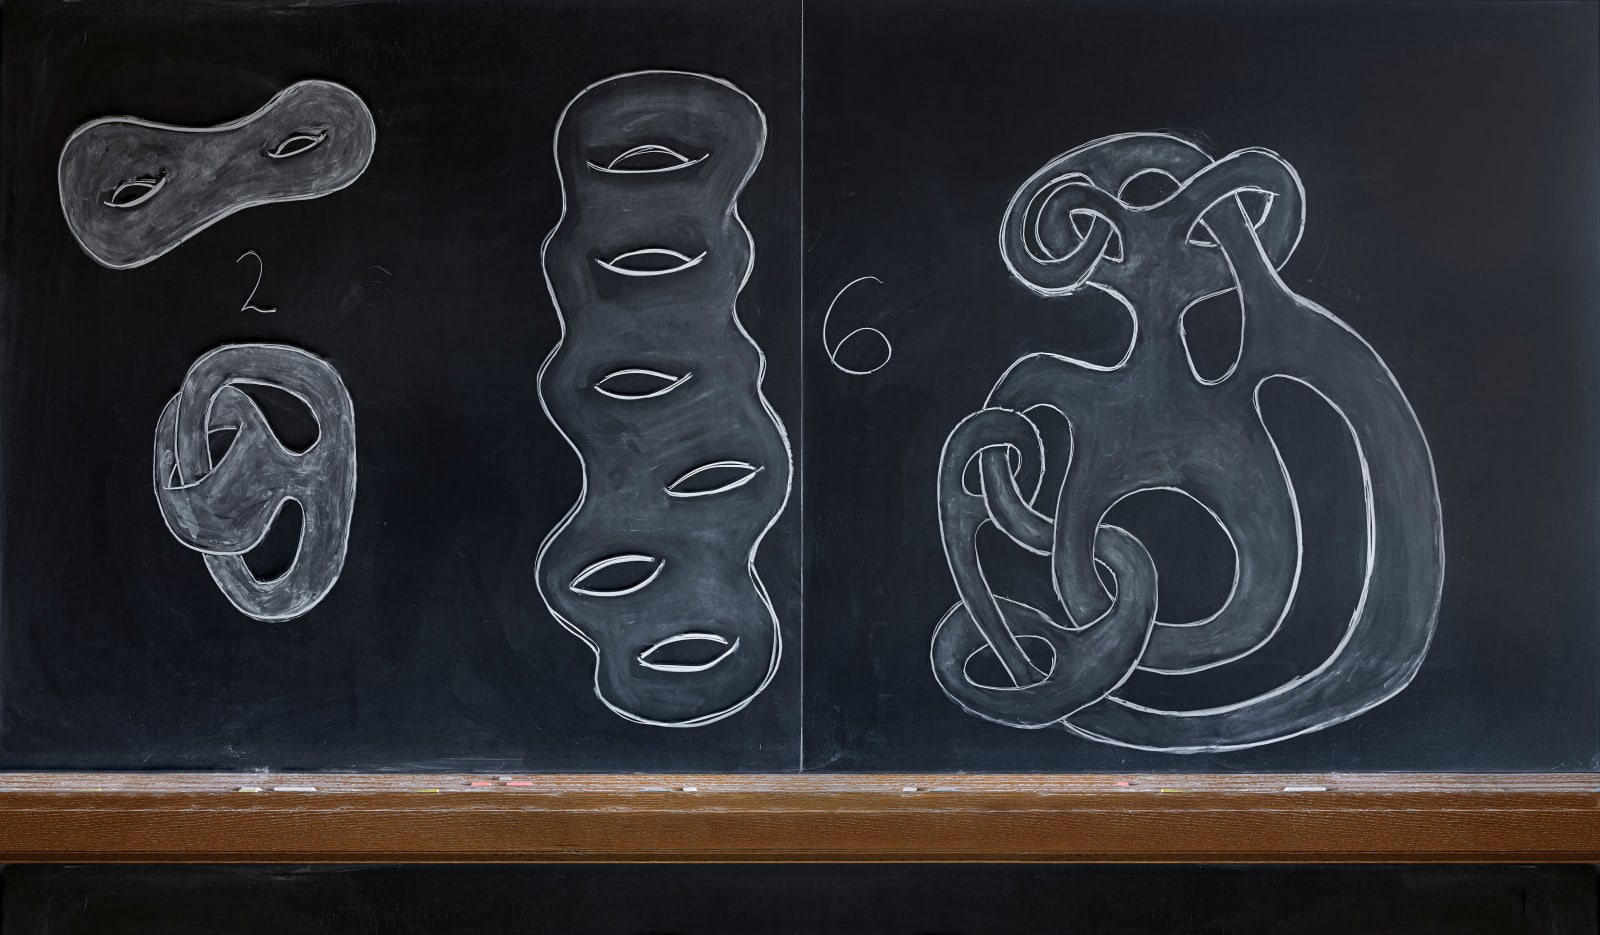 Formulas on chalkboard by mathematician Nancy Hingston, from the Do Not Erase series by Jessica Wynne